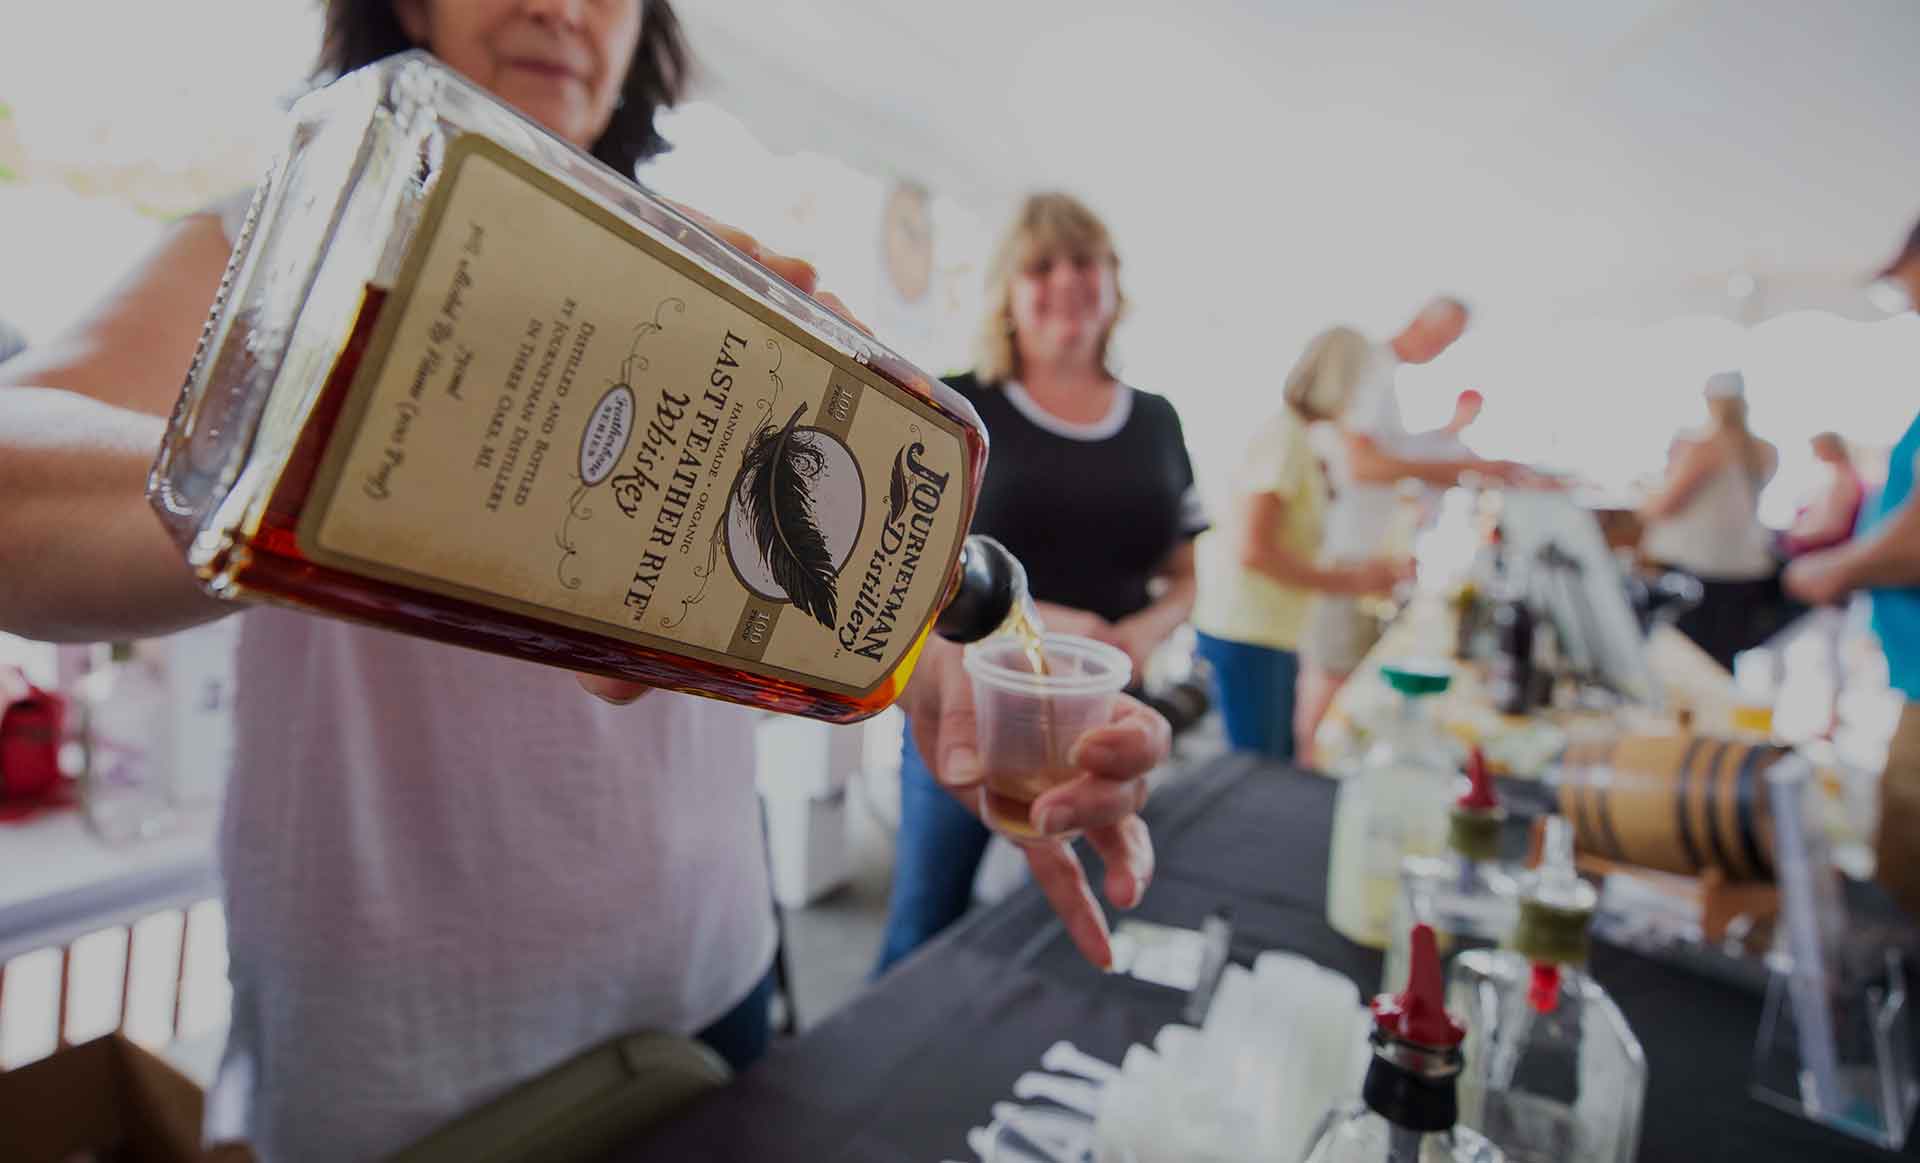 A person pouring a tasting of whiskey at an event.